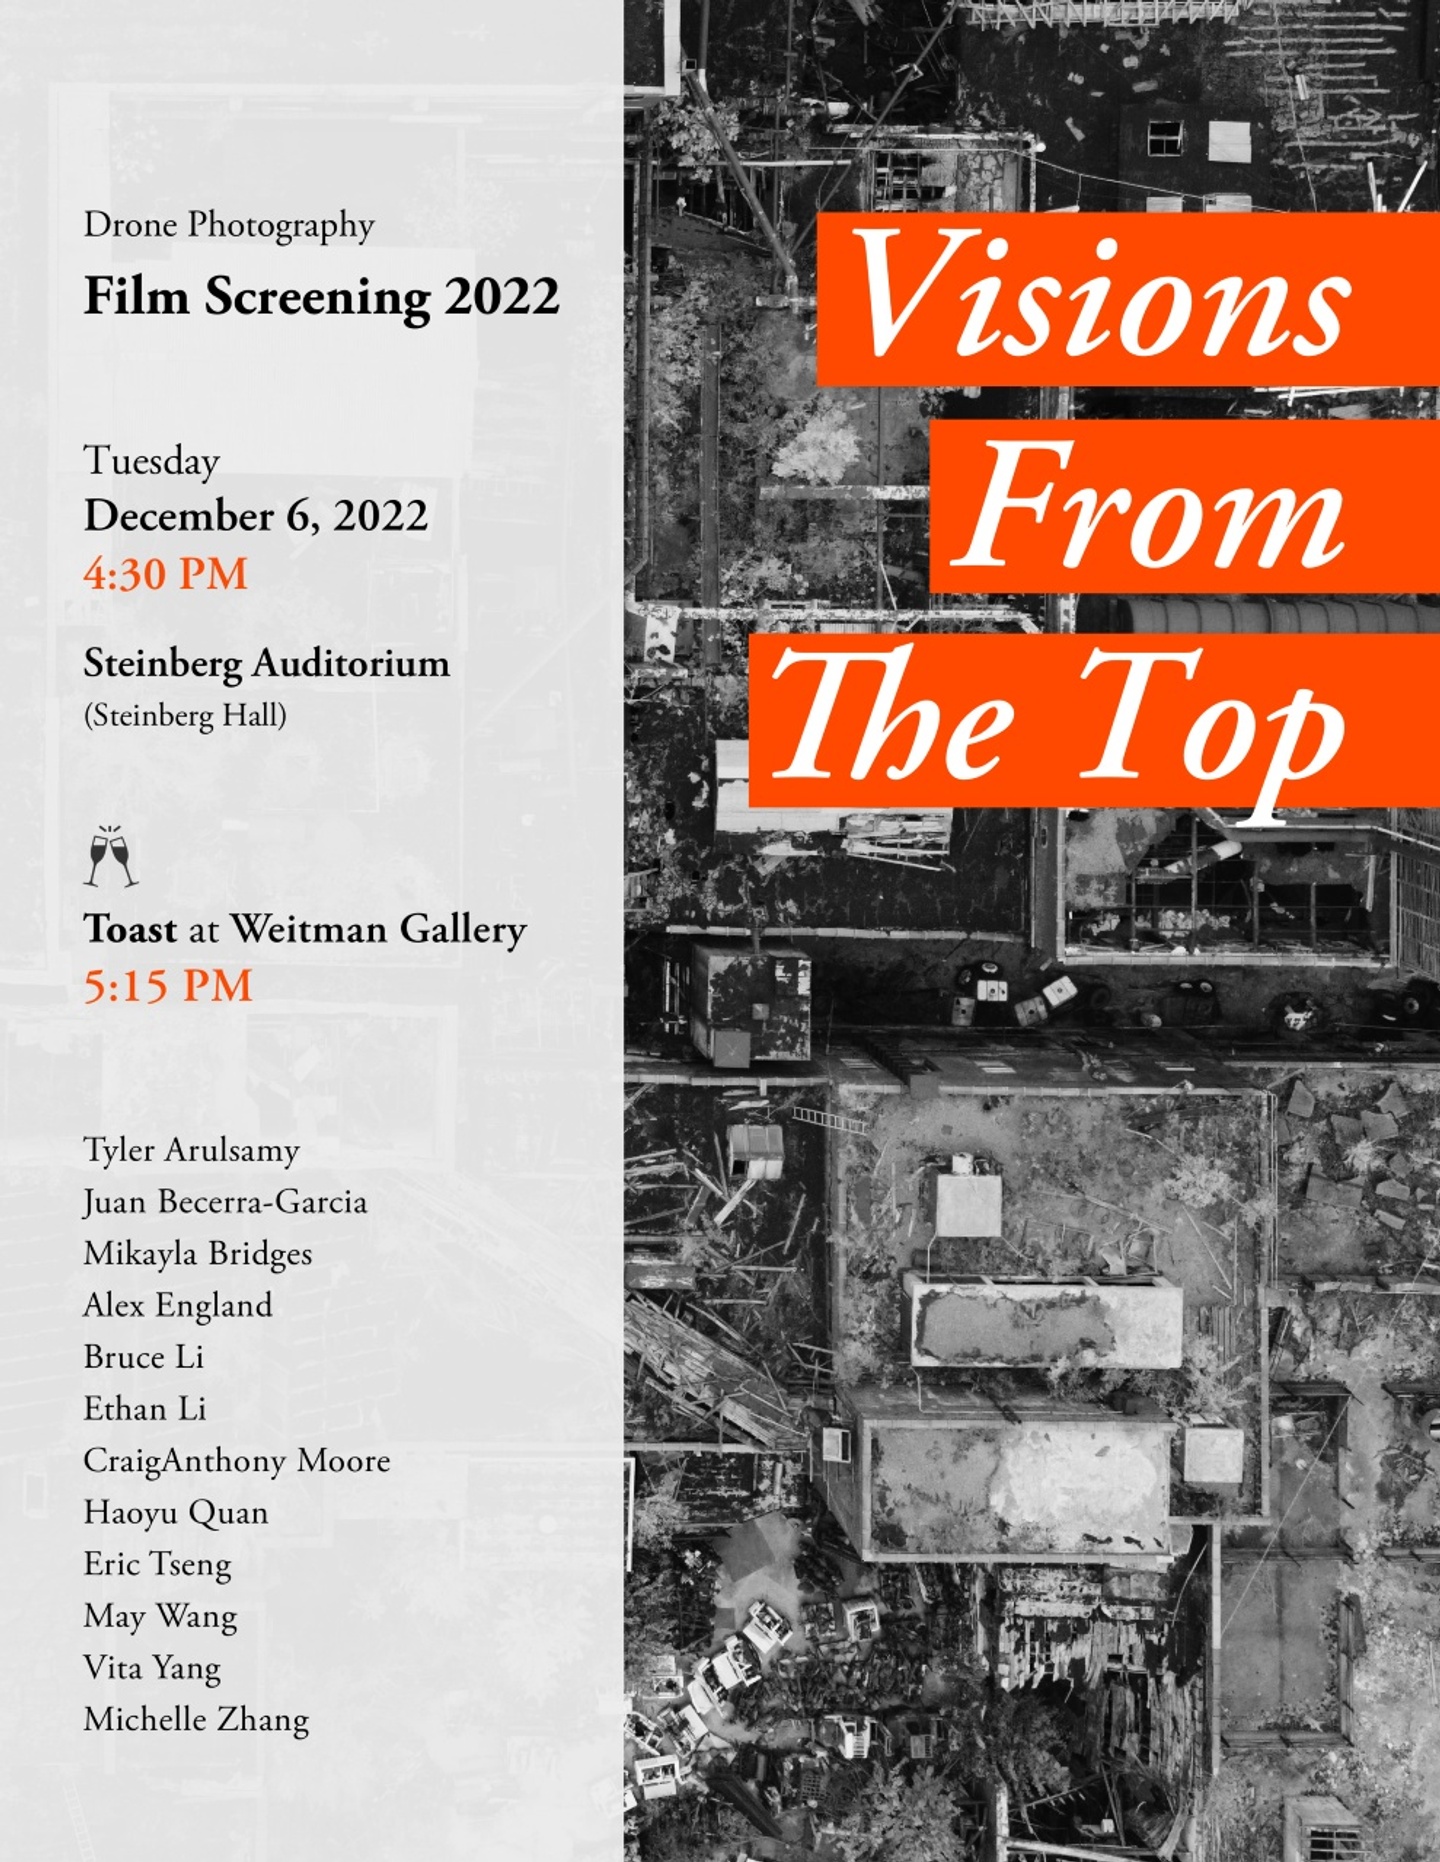 Poster of Visions from the Top with venue and time details and a list of participating students